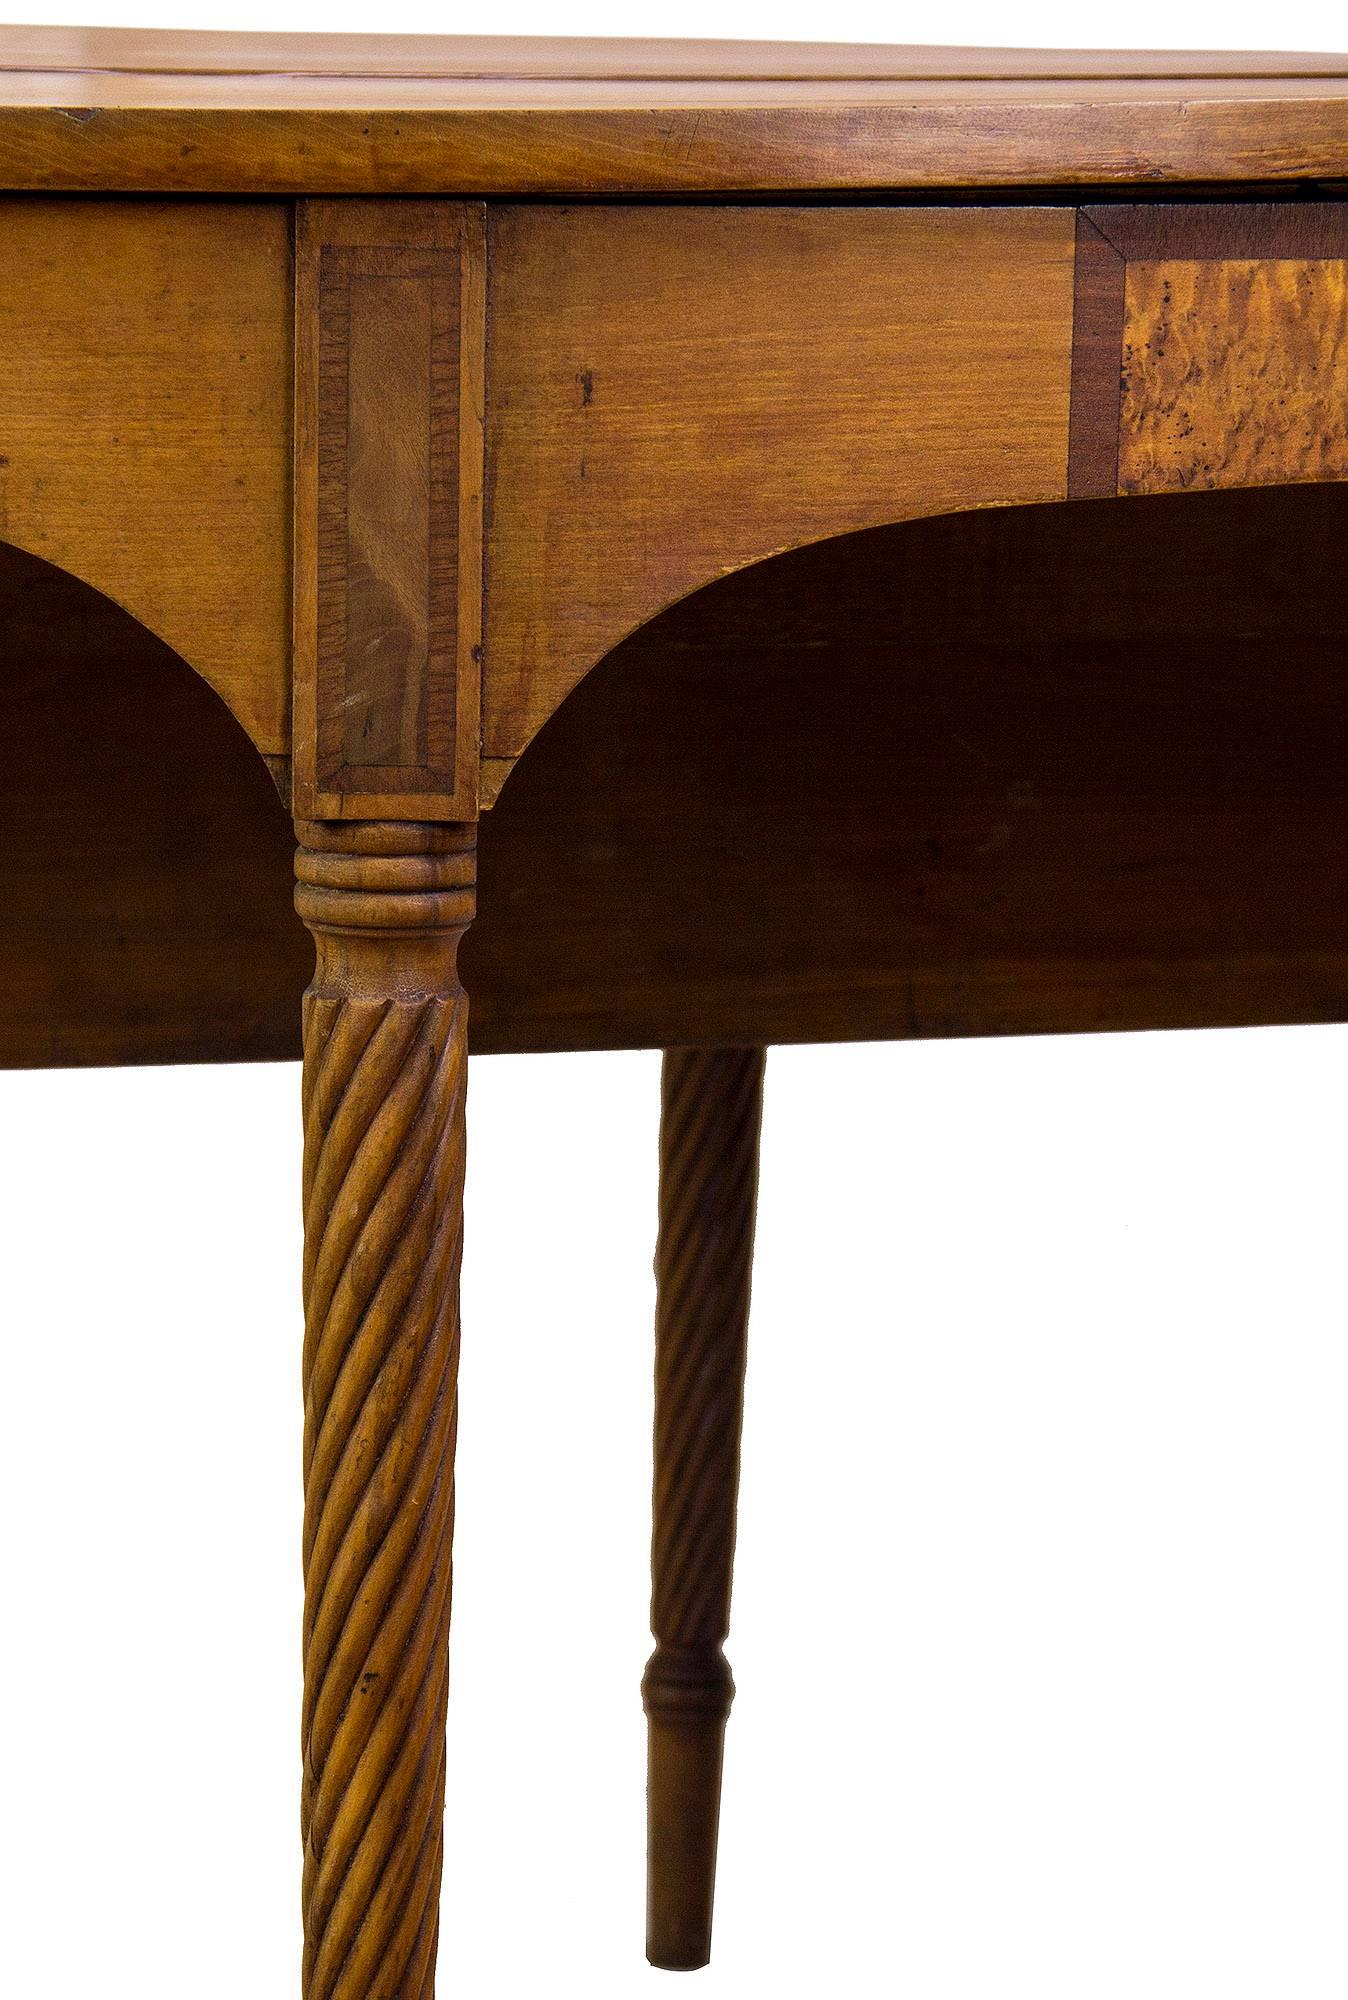 American Sheraton Cherry Inlaid Banquet Table of Small Scale with Rope-Tuned Legs, 1815 For Sale